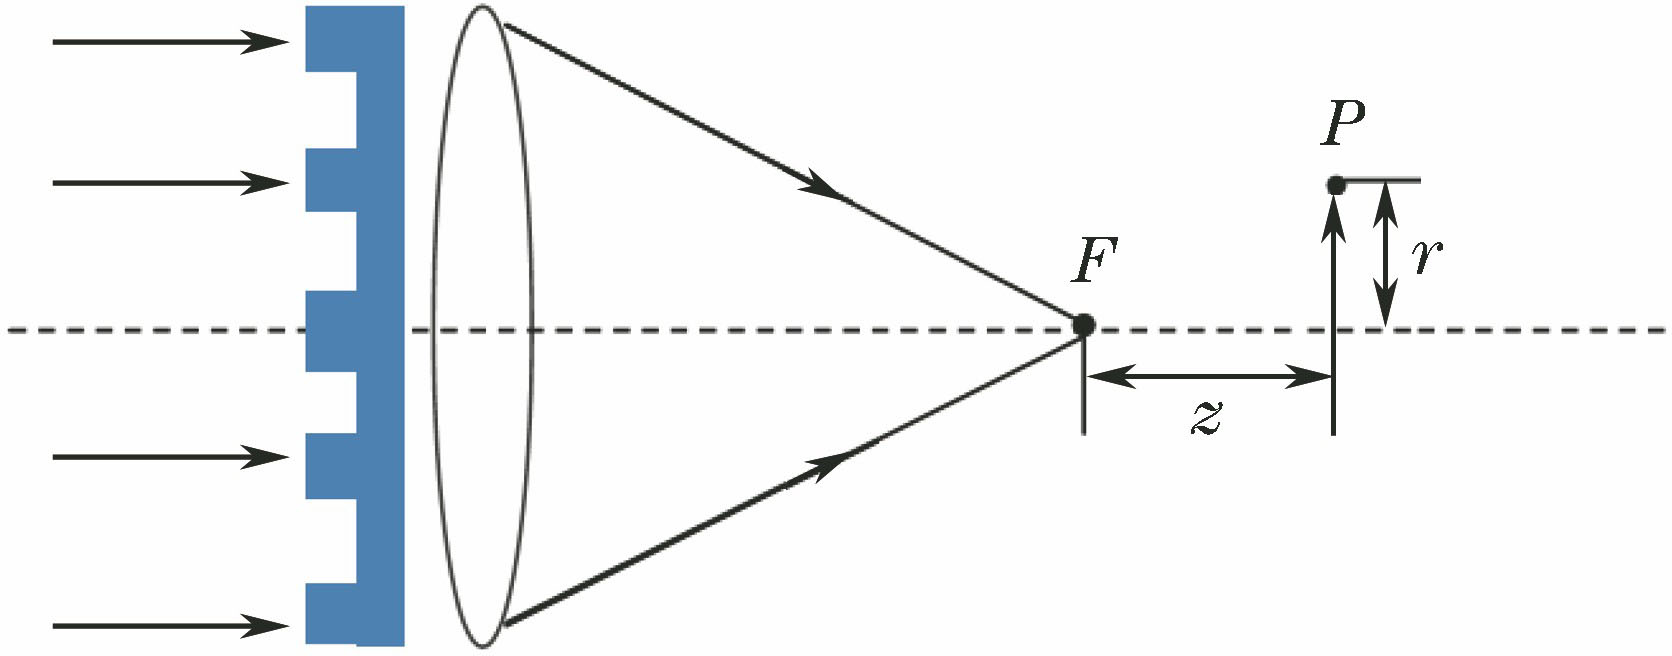 Schematic for calculation of focal field